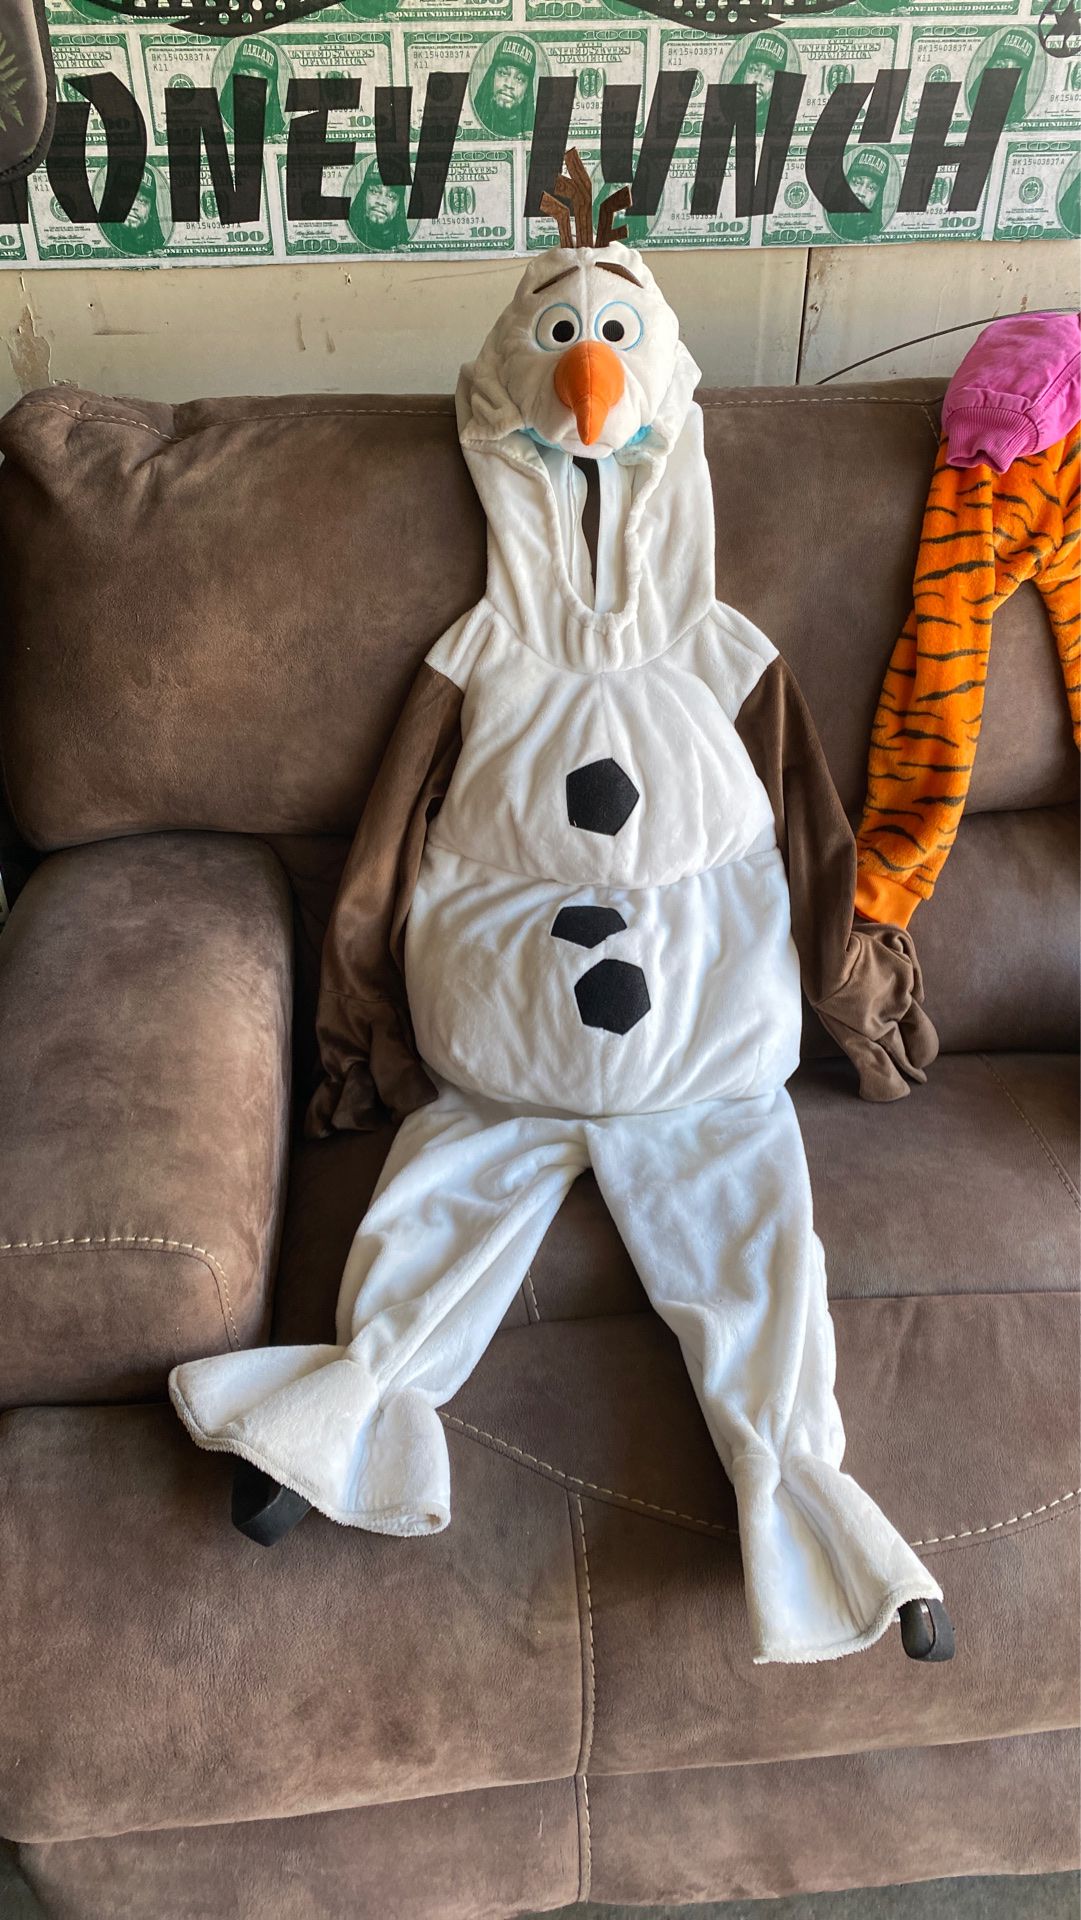 Kids size 4T Disney Olaf costume. Used once.